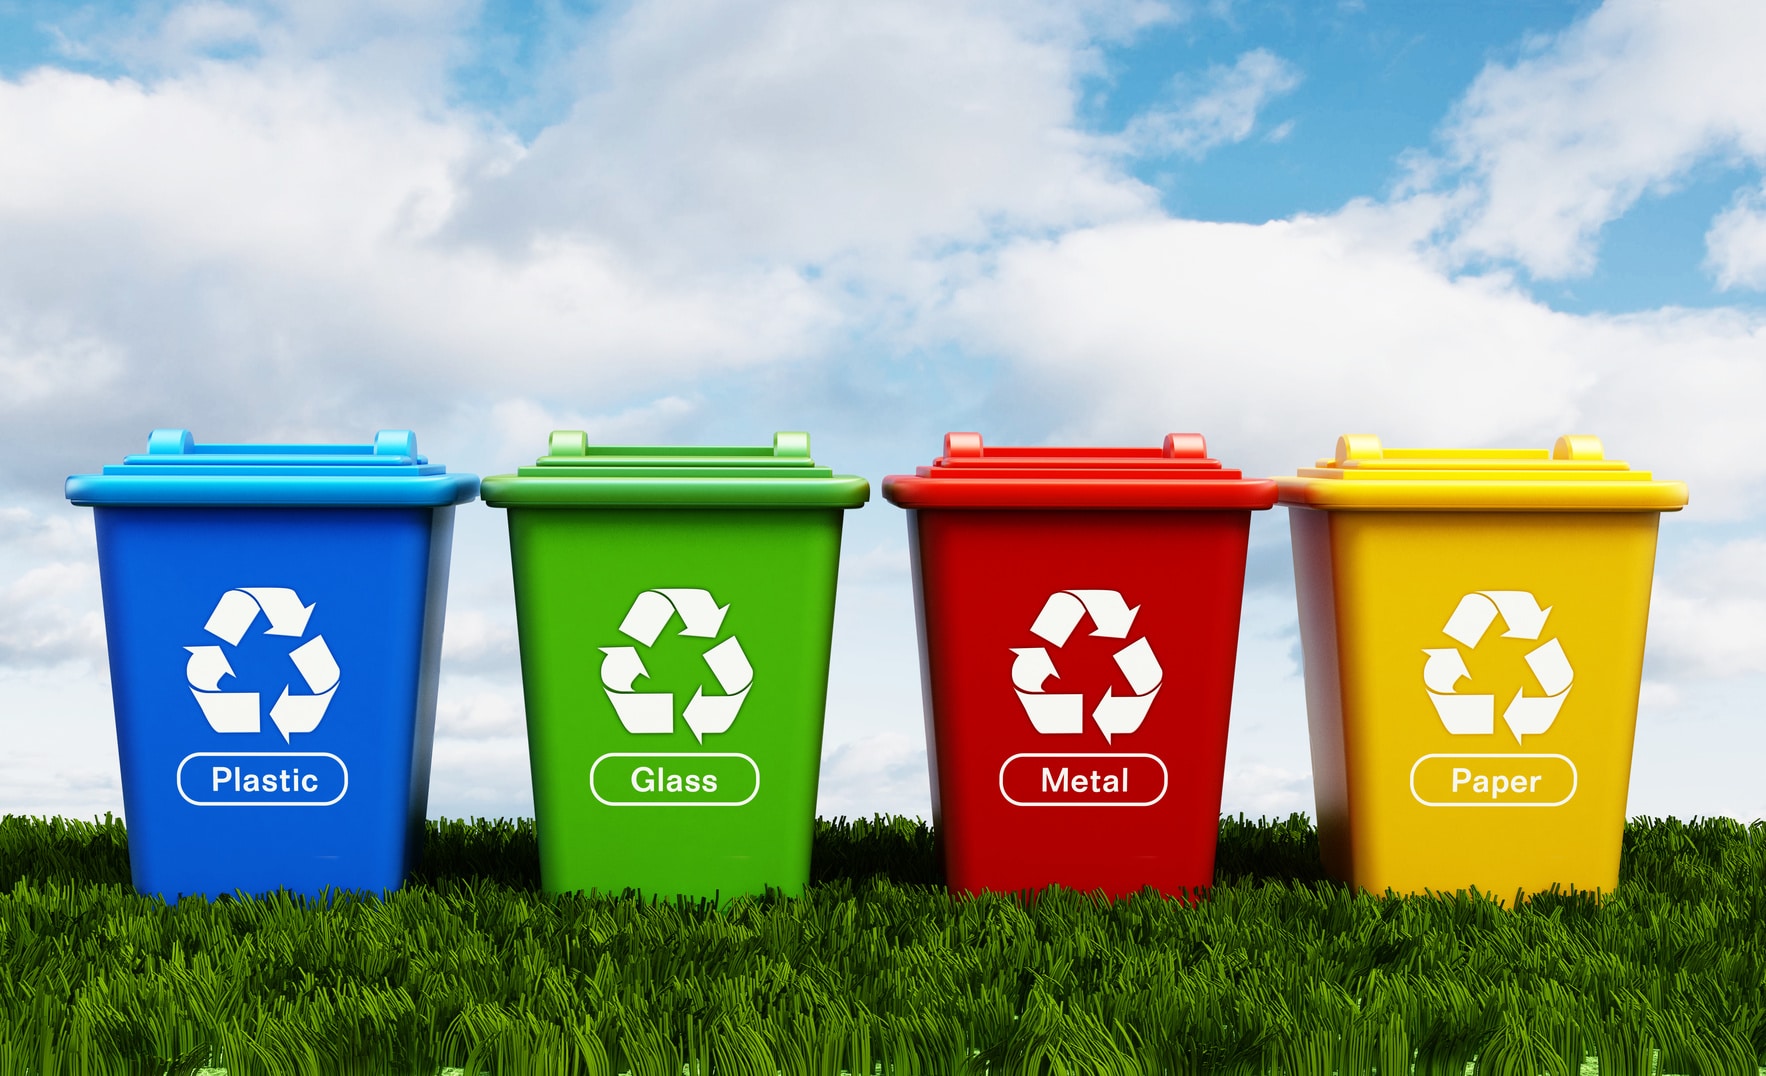 Plastic, glass, metal and paper recycle bins and look to a renown company in Burnham who can help you with all your scrap metal recycling needs.